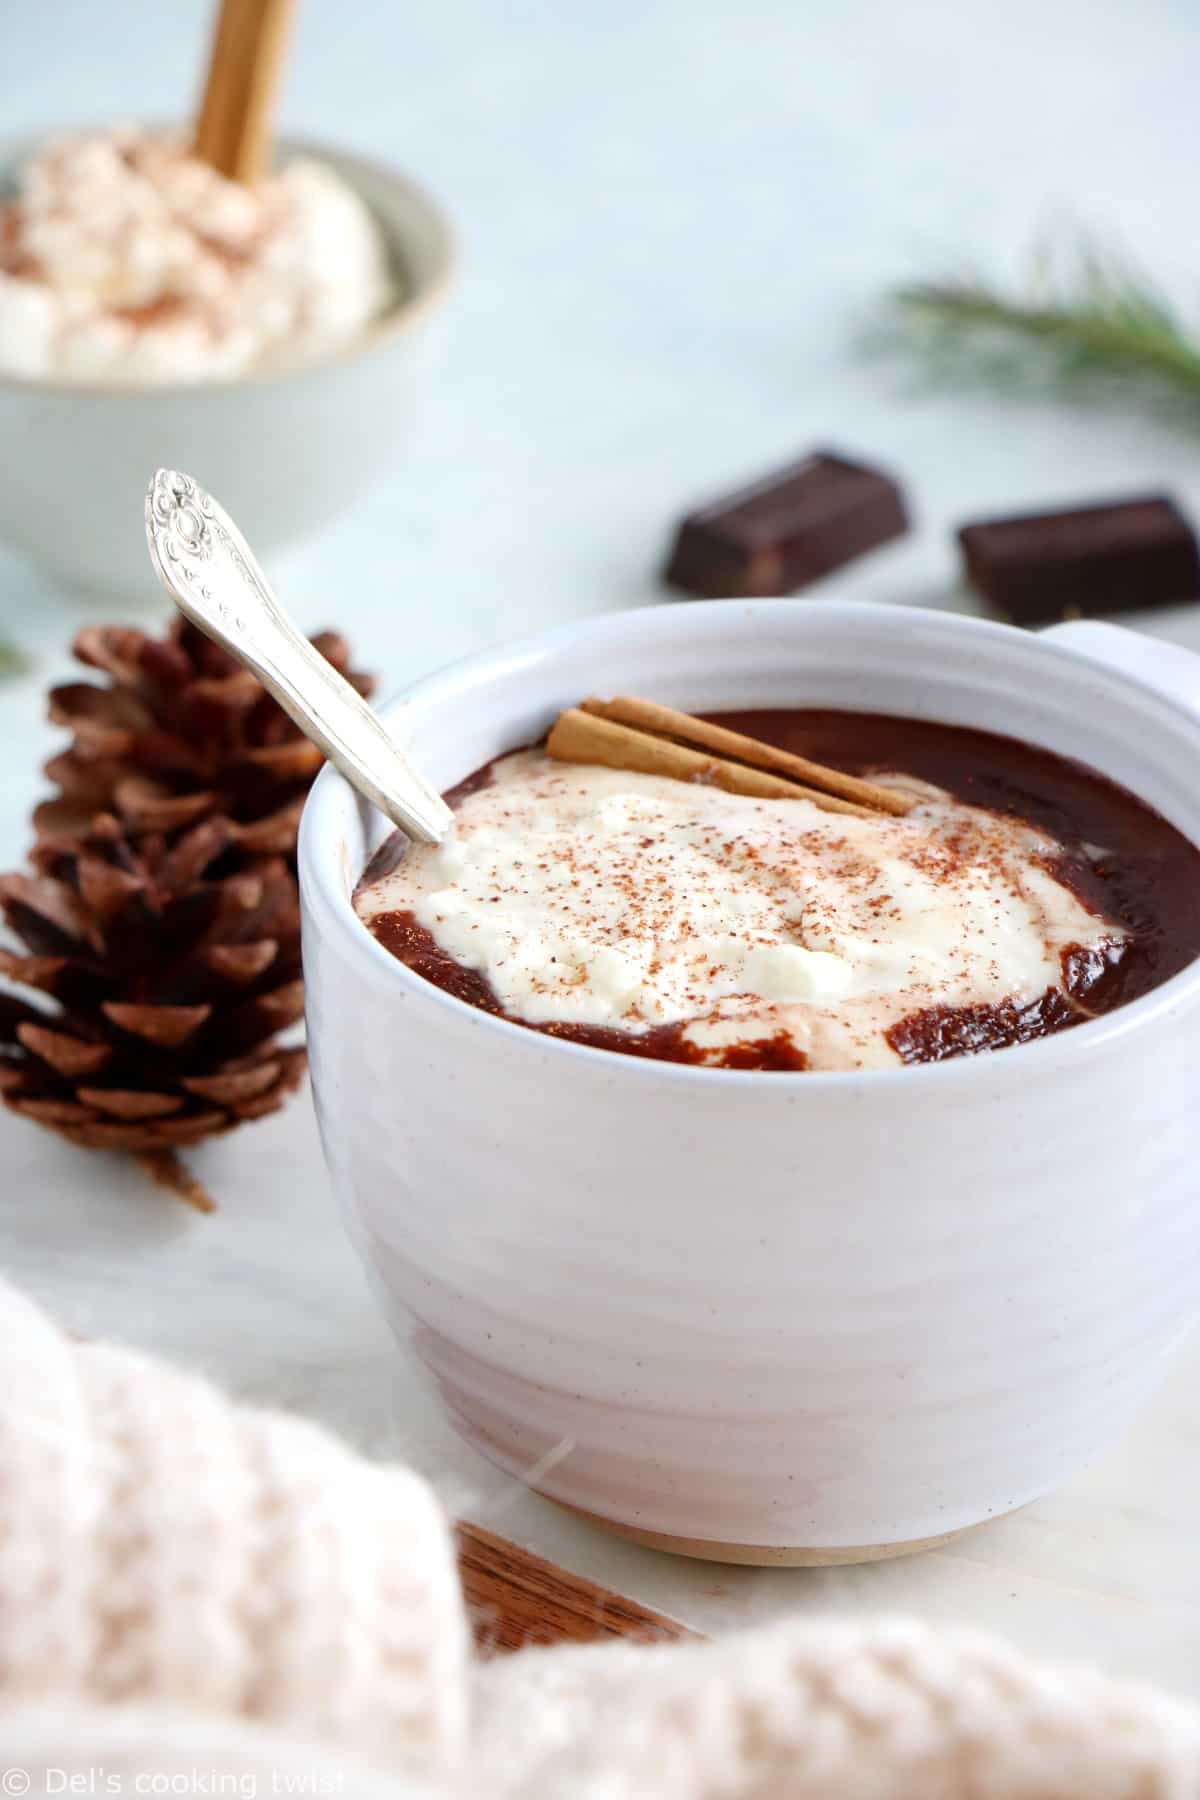 Best homemade hot chocolate is a rich and creamy hot chocolate recipe, prepared with real dark baking chocolate for more intense flavors.